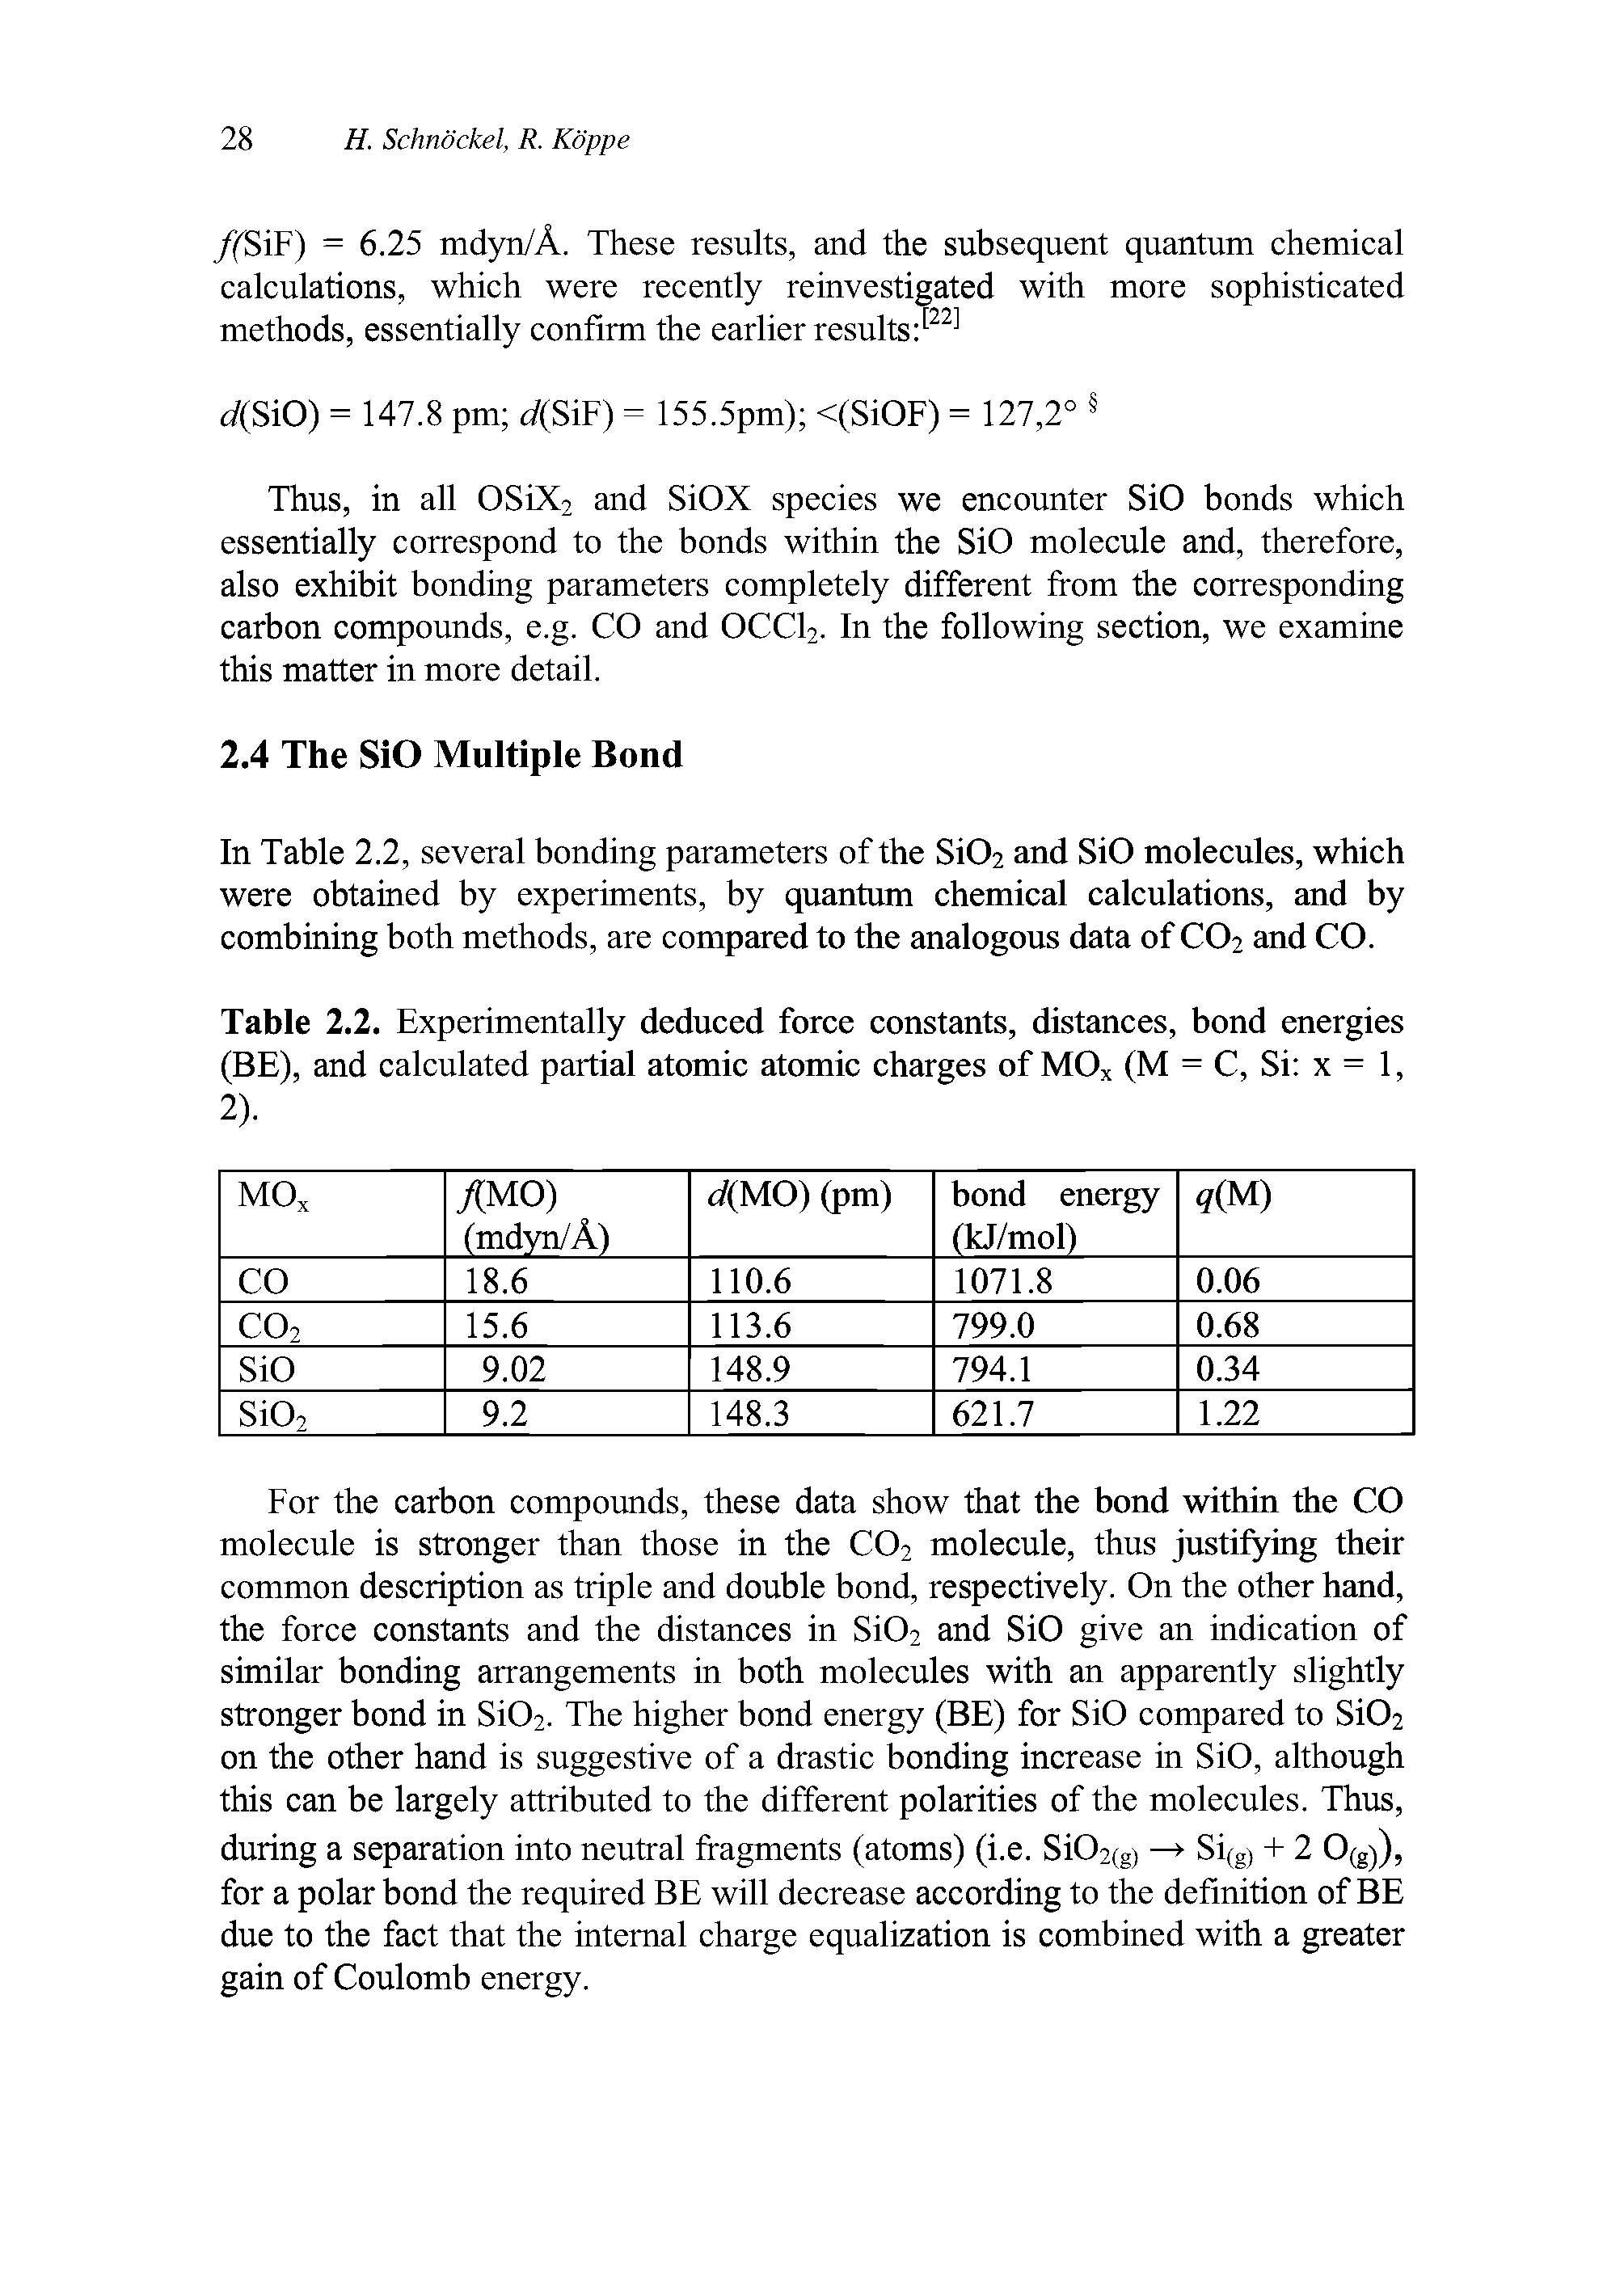 Table 2.2. Experimentally deduced force constants, distances, bond energies (BE), and calculated partial atomic atomic charges of MOx (M = C, Si x = 1, 2).